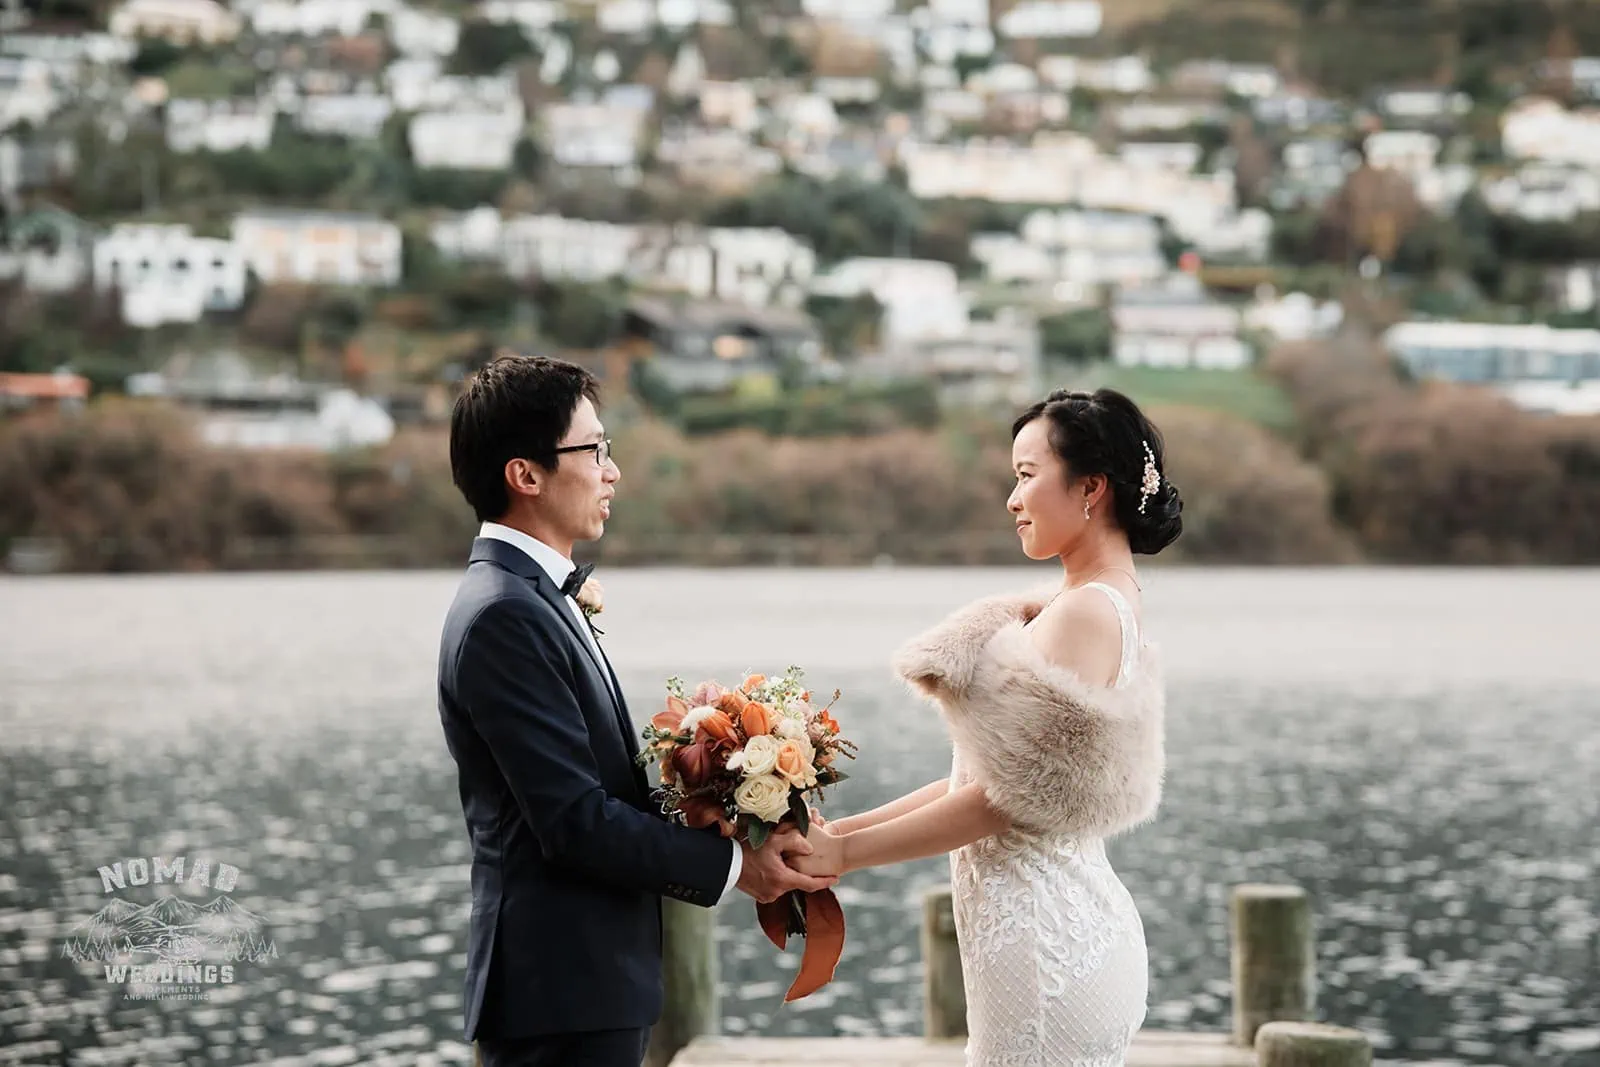 Joanna and Tony, a bride and groom, posing on a dock for their pre-wedding shoot in Queenstown, New Zealand.